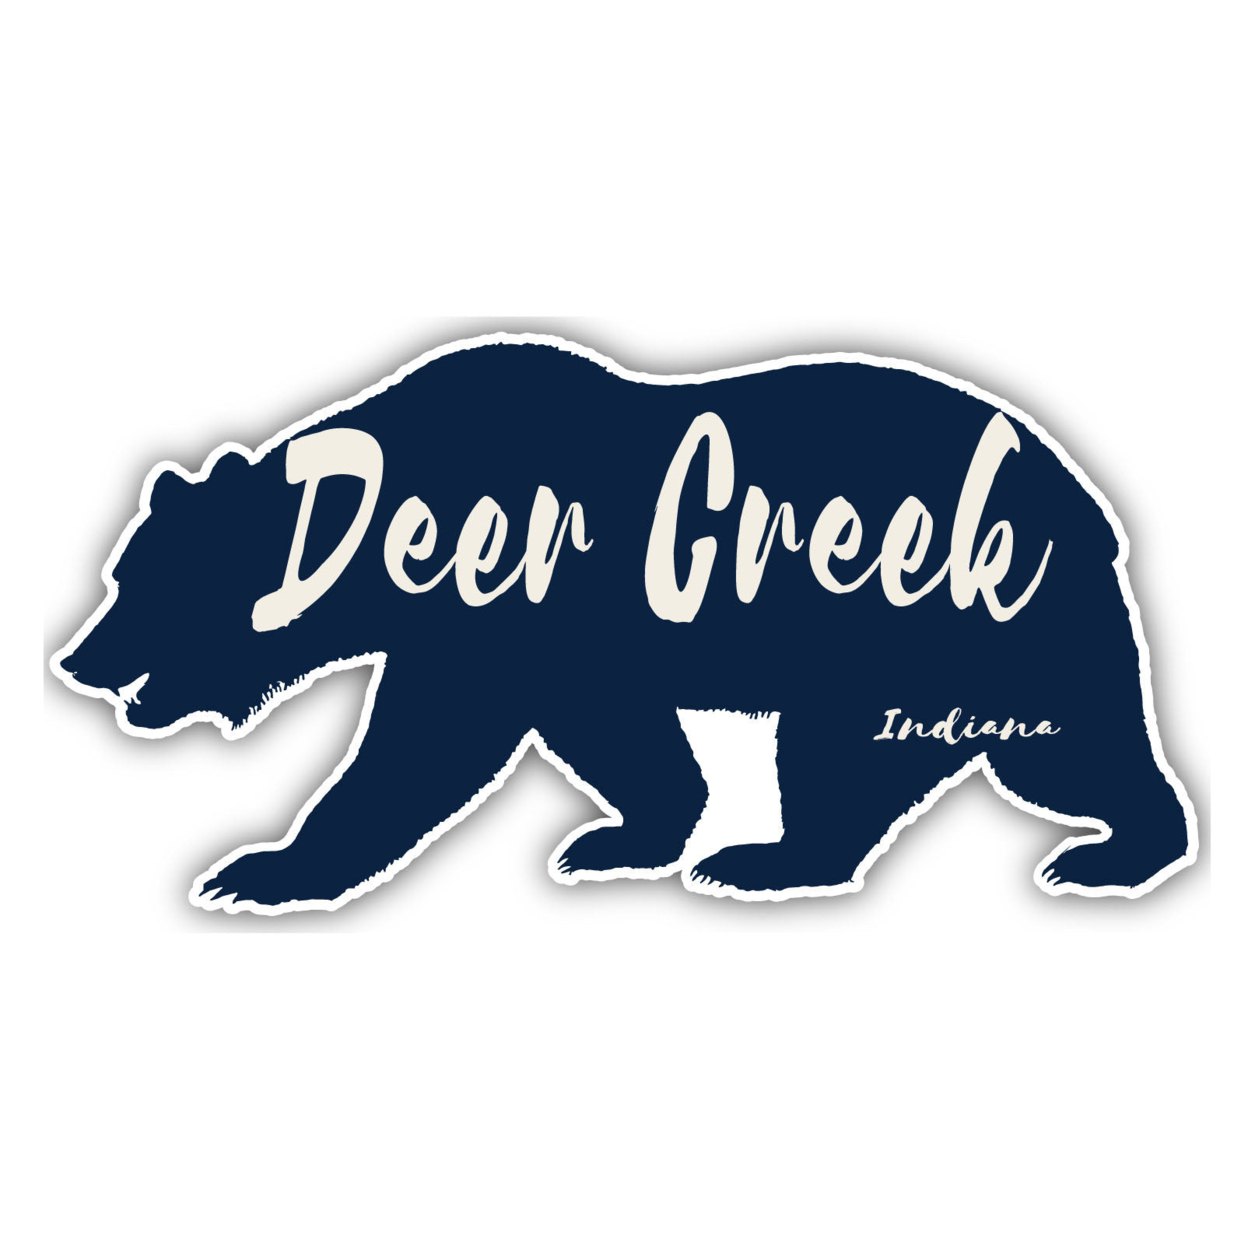 Deer Creek Indiana Souvenir Decorative Stickers (Choose Theme And Size) - 4-Pack, 10-Inch, Great Outdoors